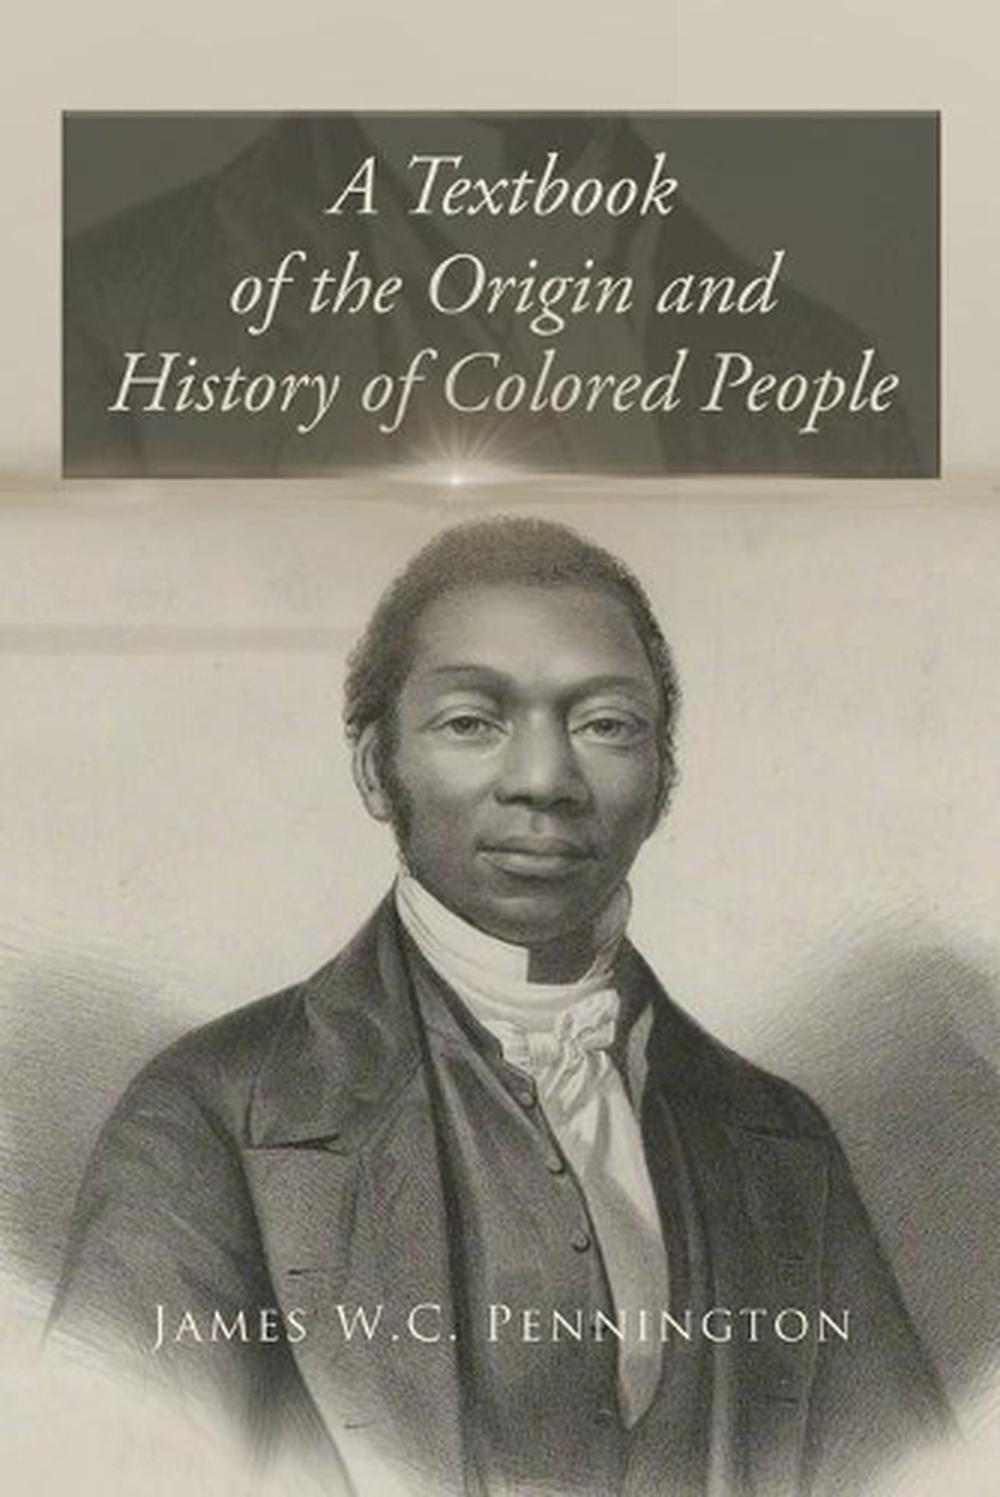 heads of the colored people stories